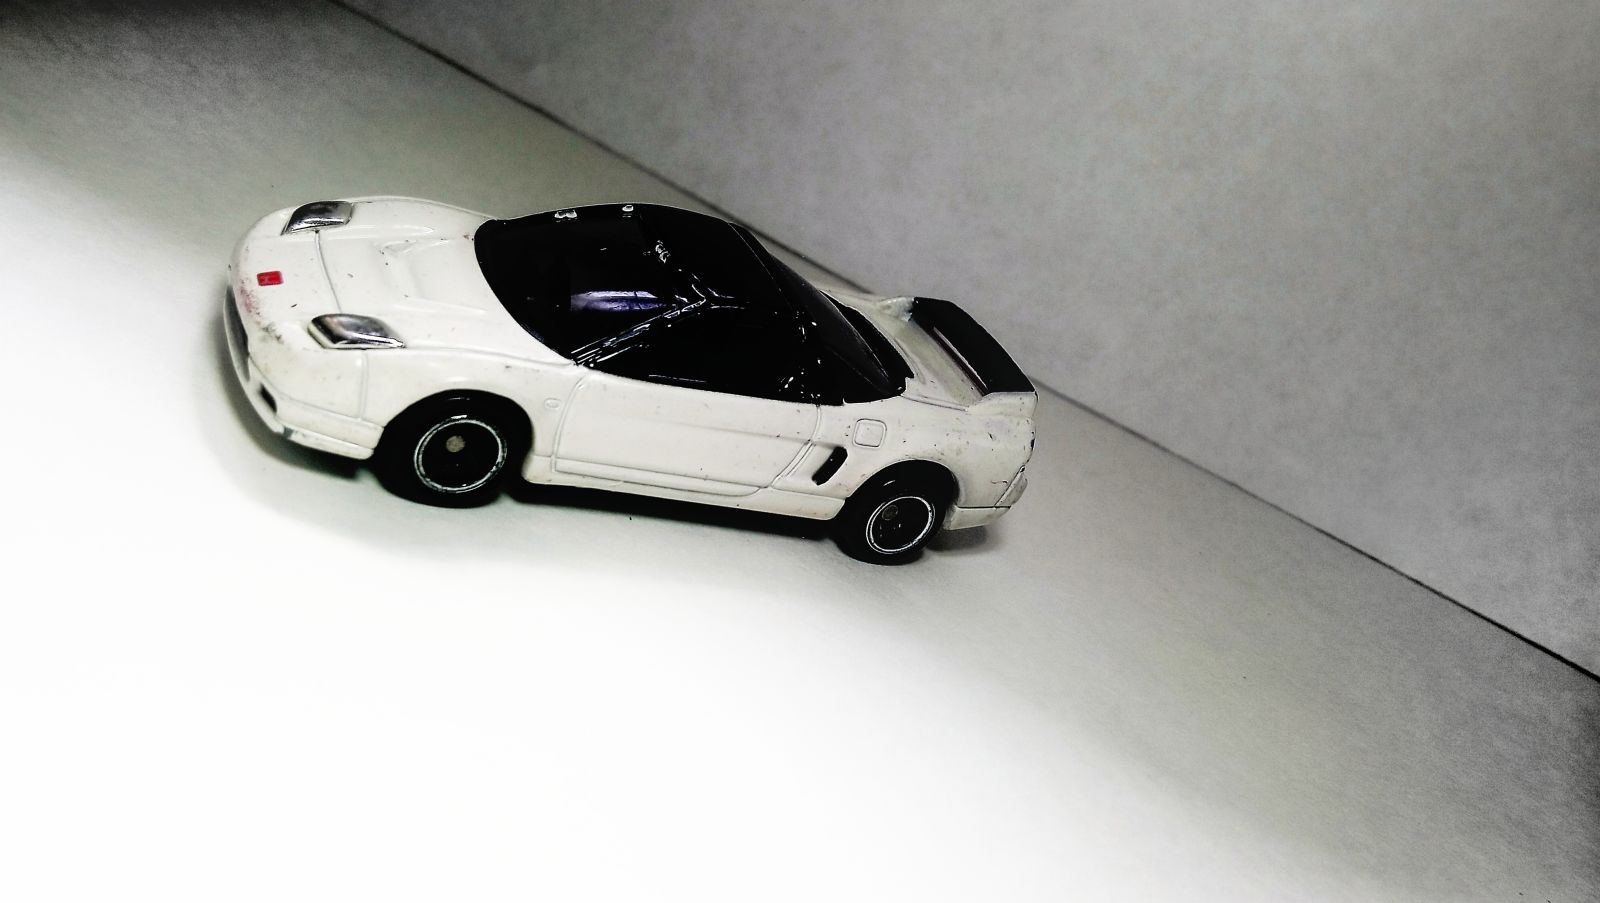 Illustration for article titled Once Upon a Time in Kagoshima | Tomica 2002 Honda NSX-R | Studio Diecast